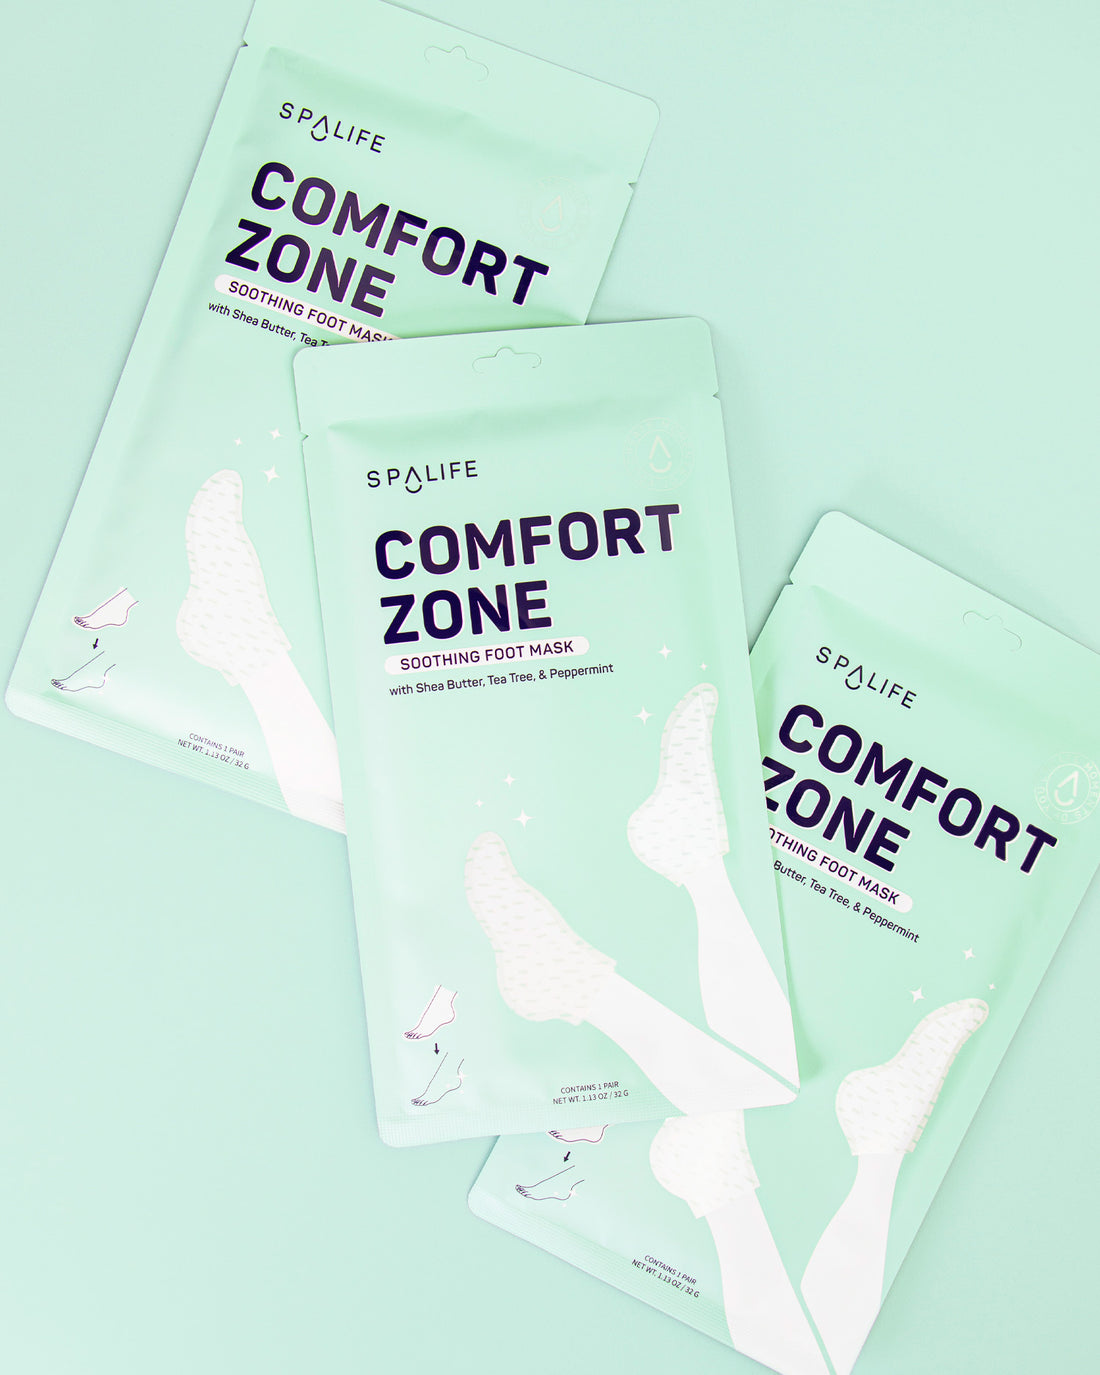 Comfort_zone_soothing_foot_mas-996